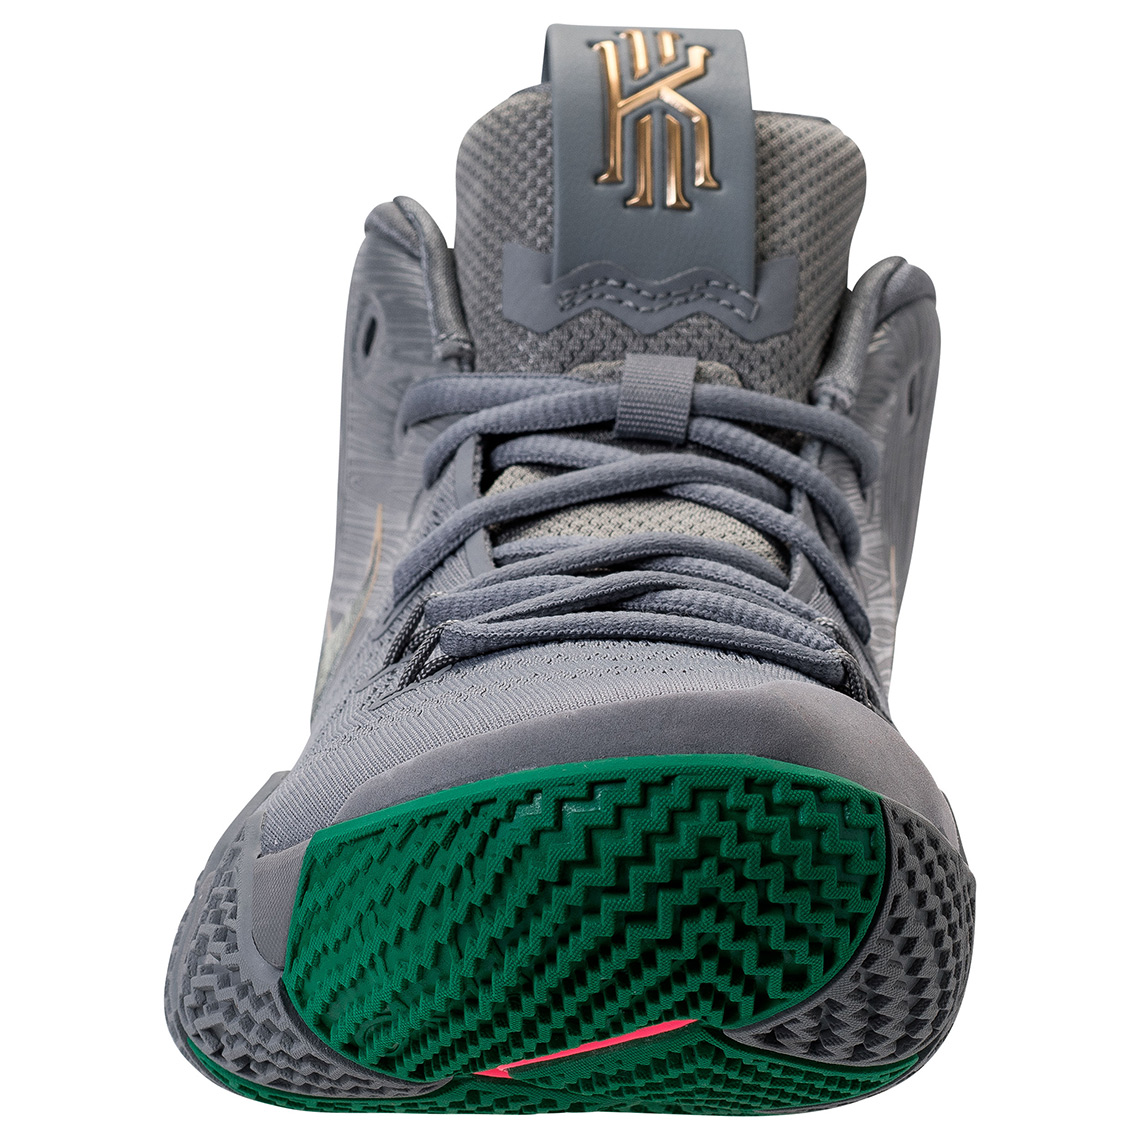 kyrie 4 green and grey